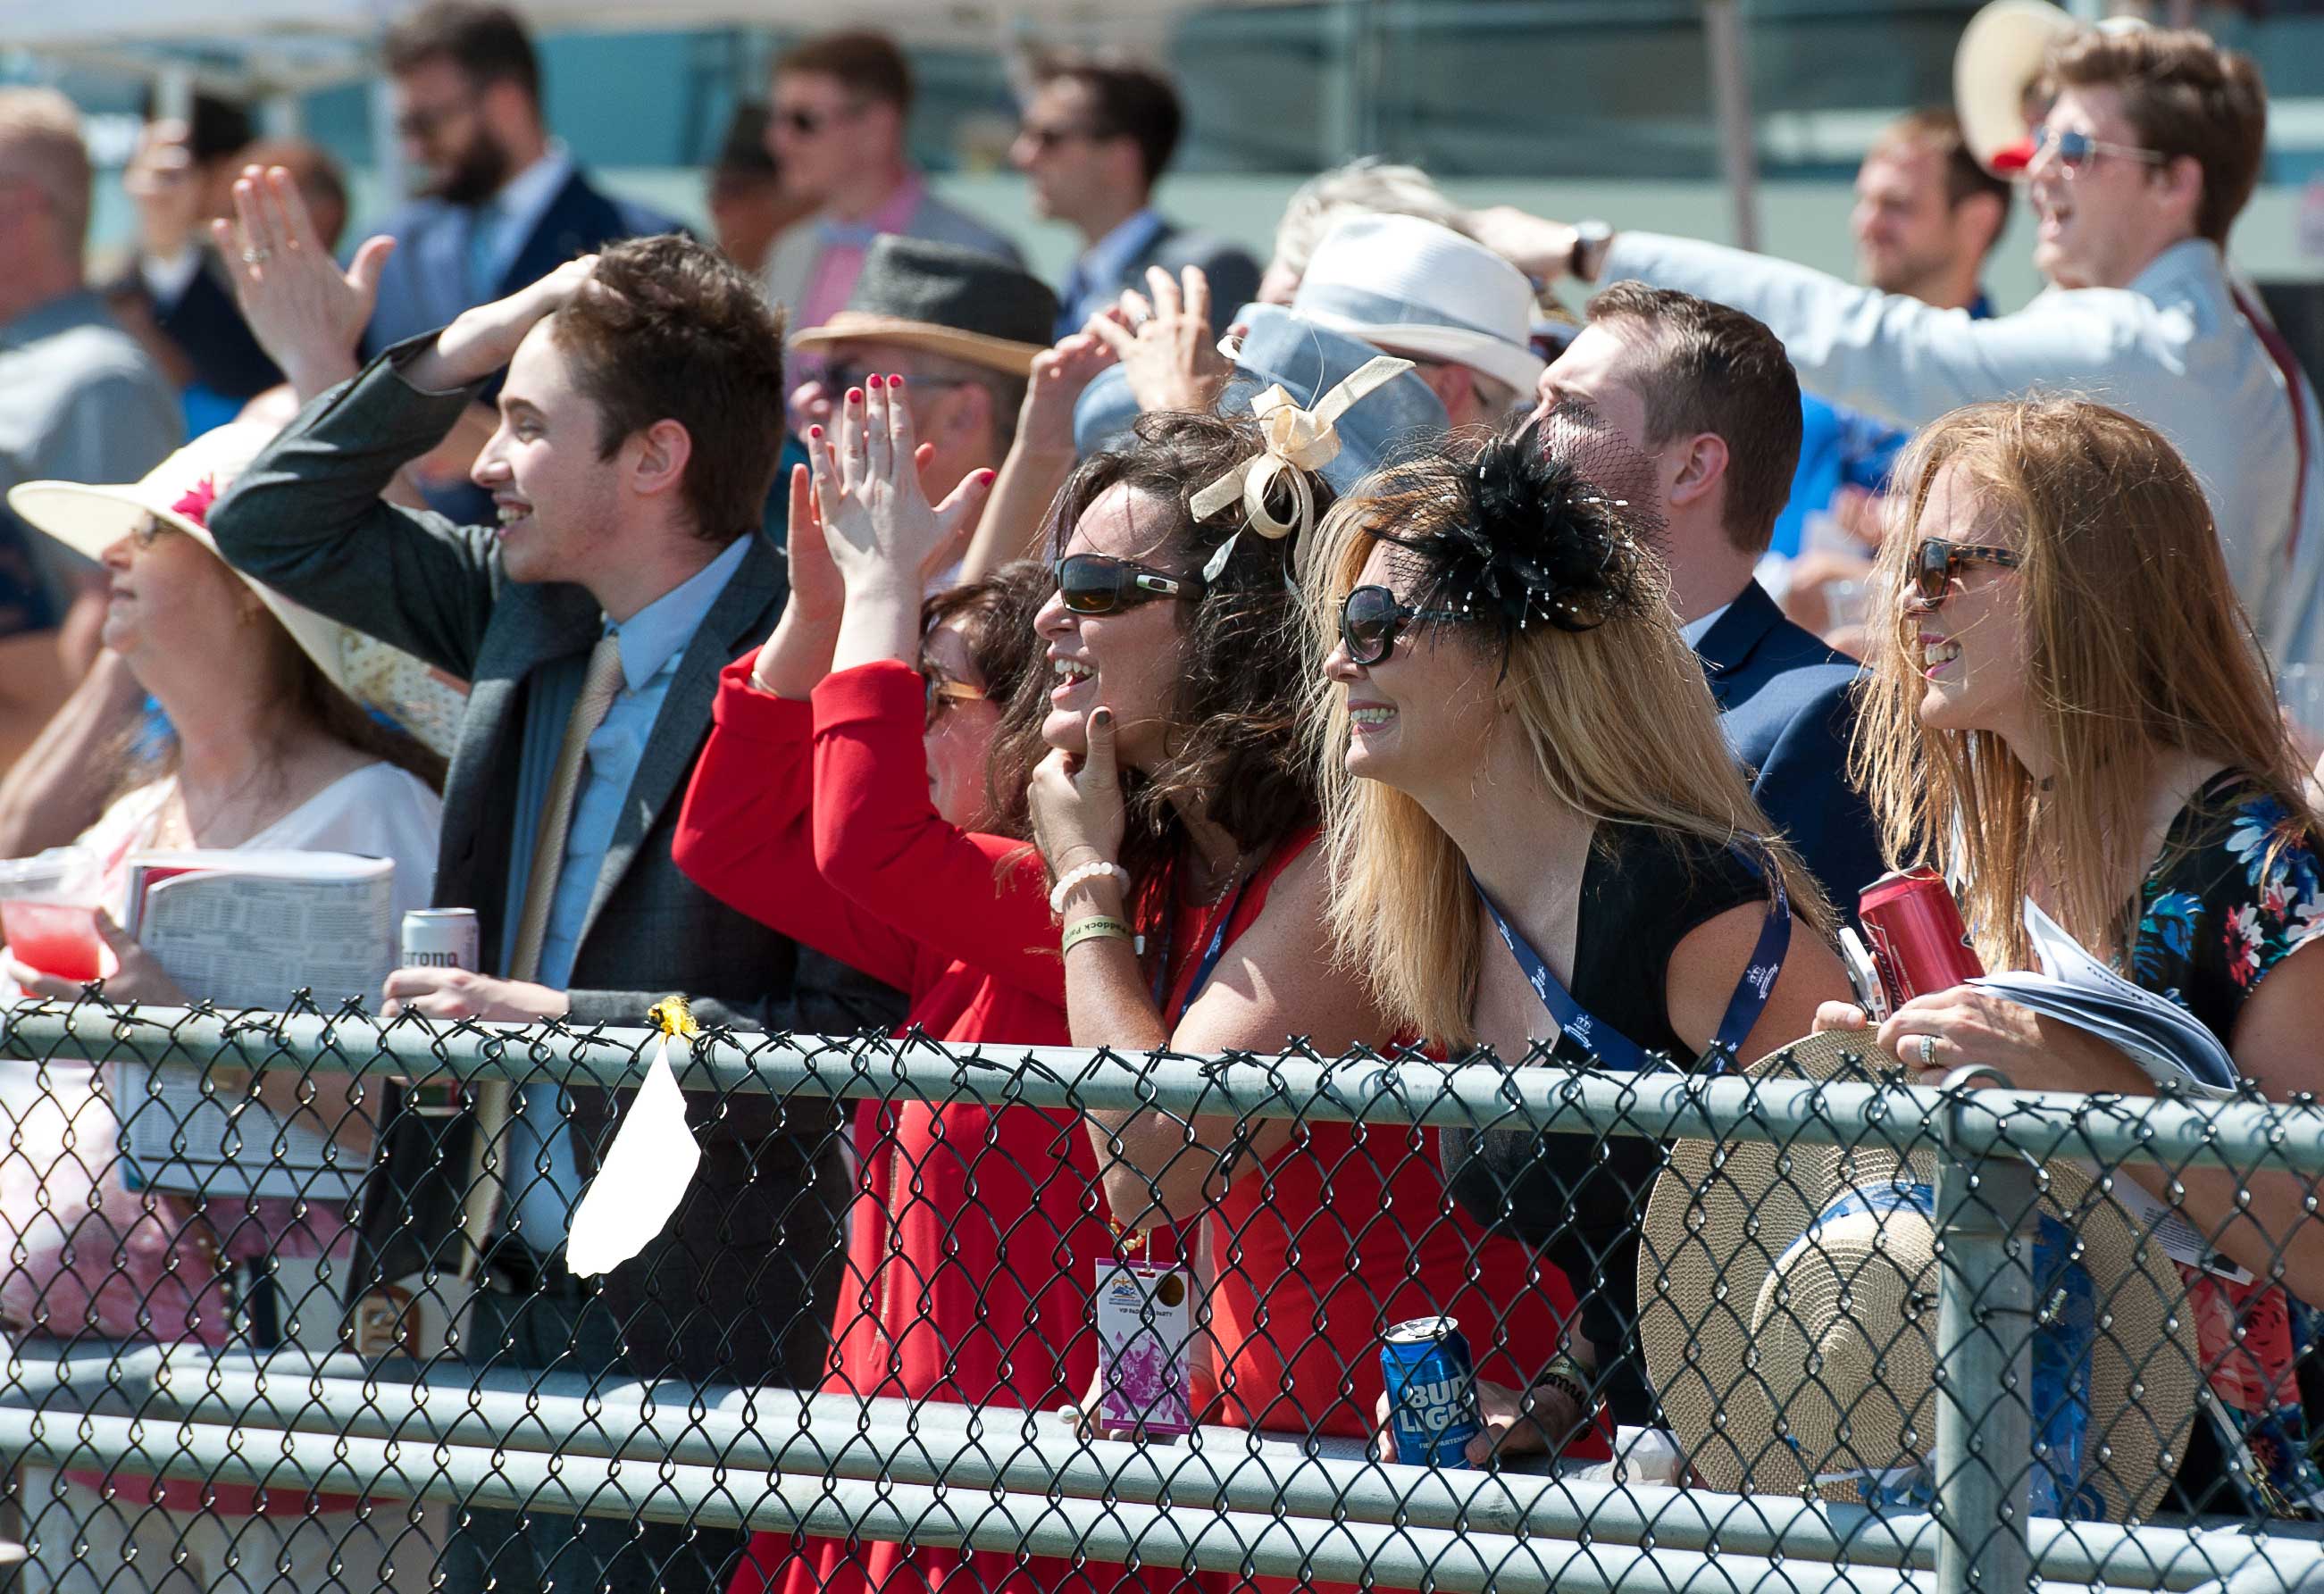 Guests cheering at the Grandstand at Woodbine Racetrack